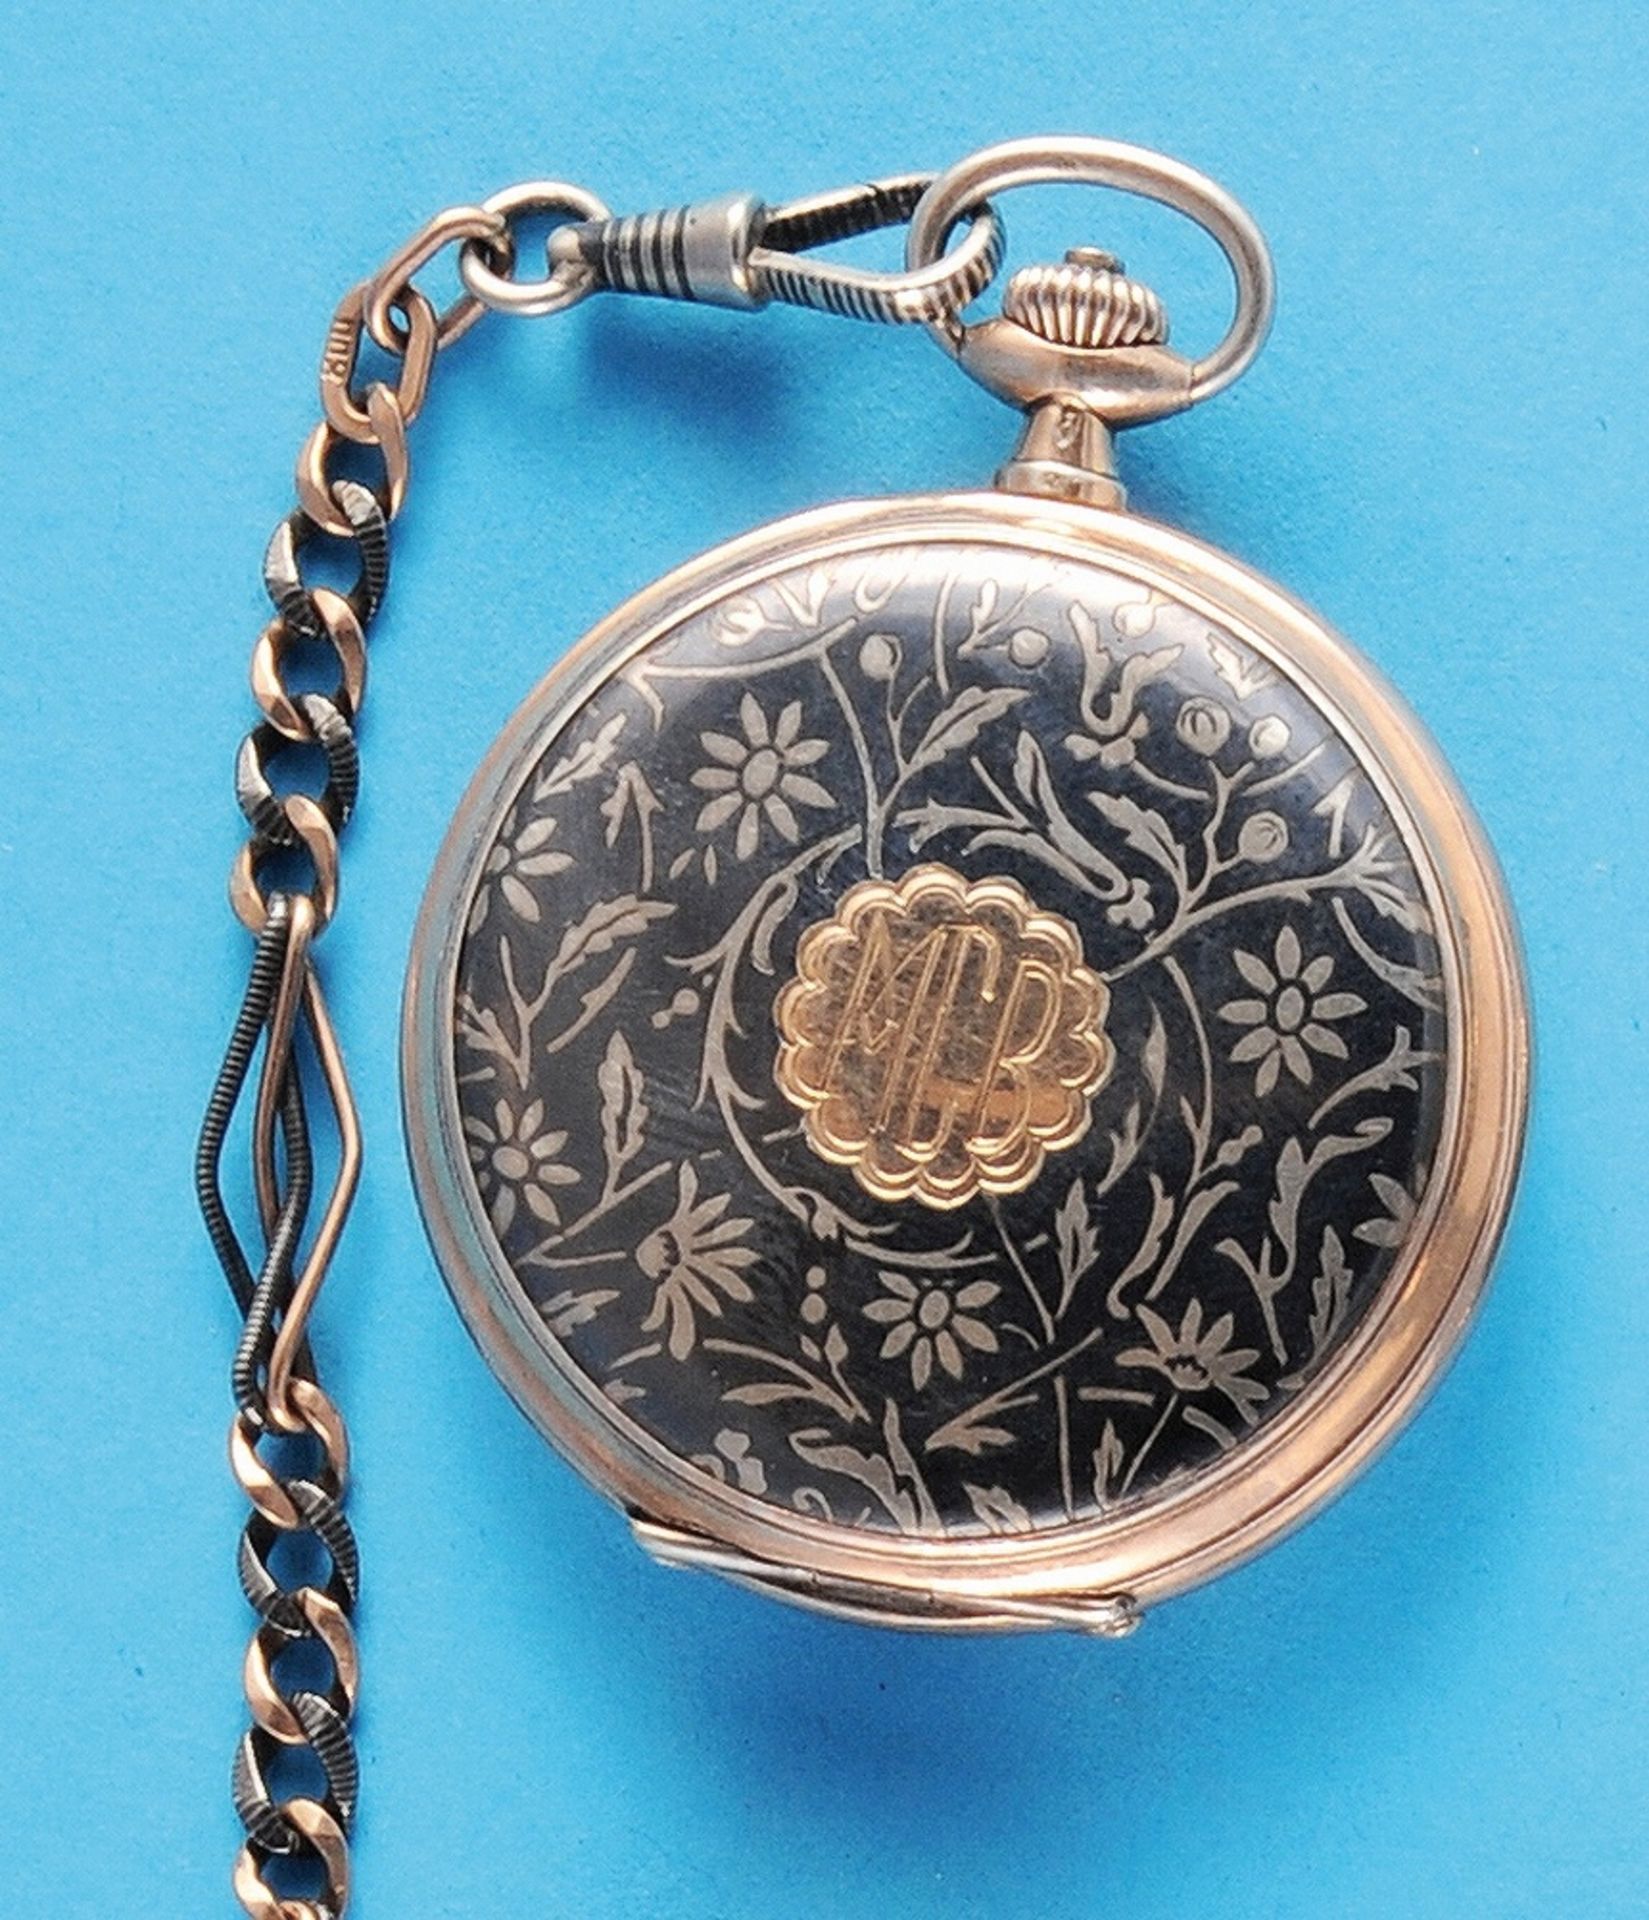 Omega Tulasilver Pocket Watch with Spring Cover and Tulasilver Chain - Image 2 of 2